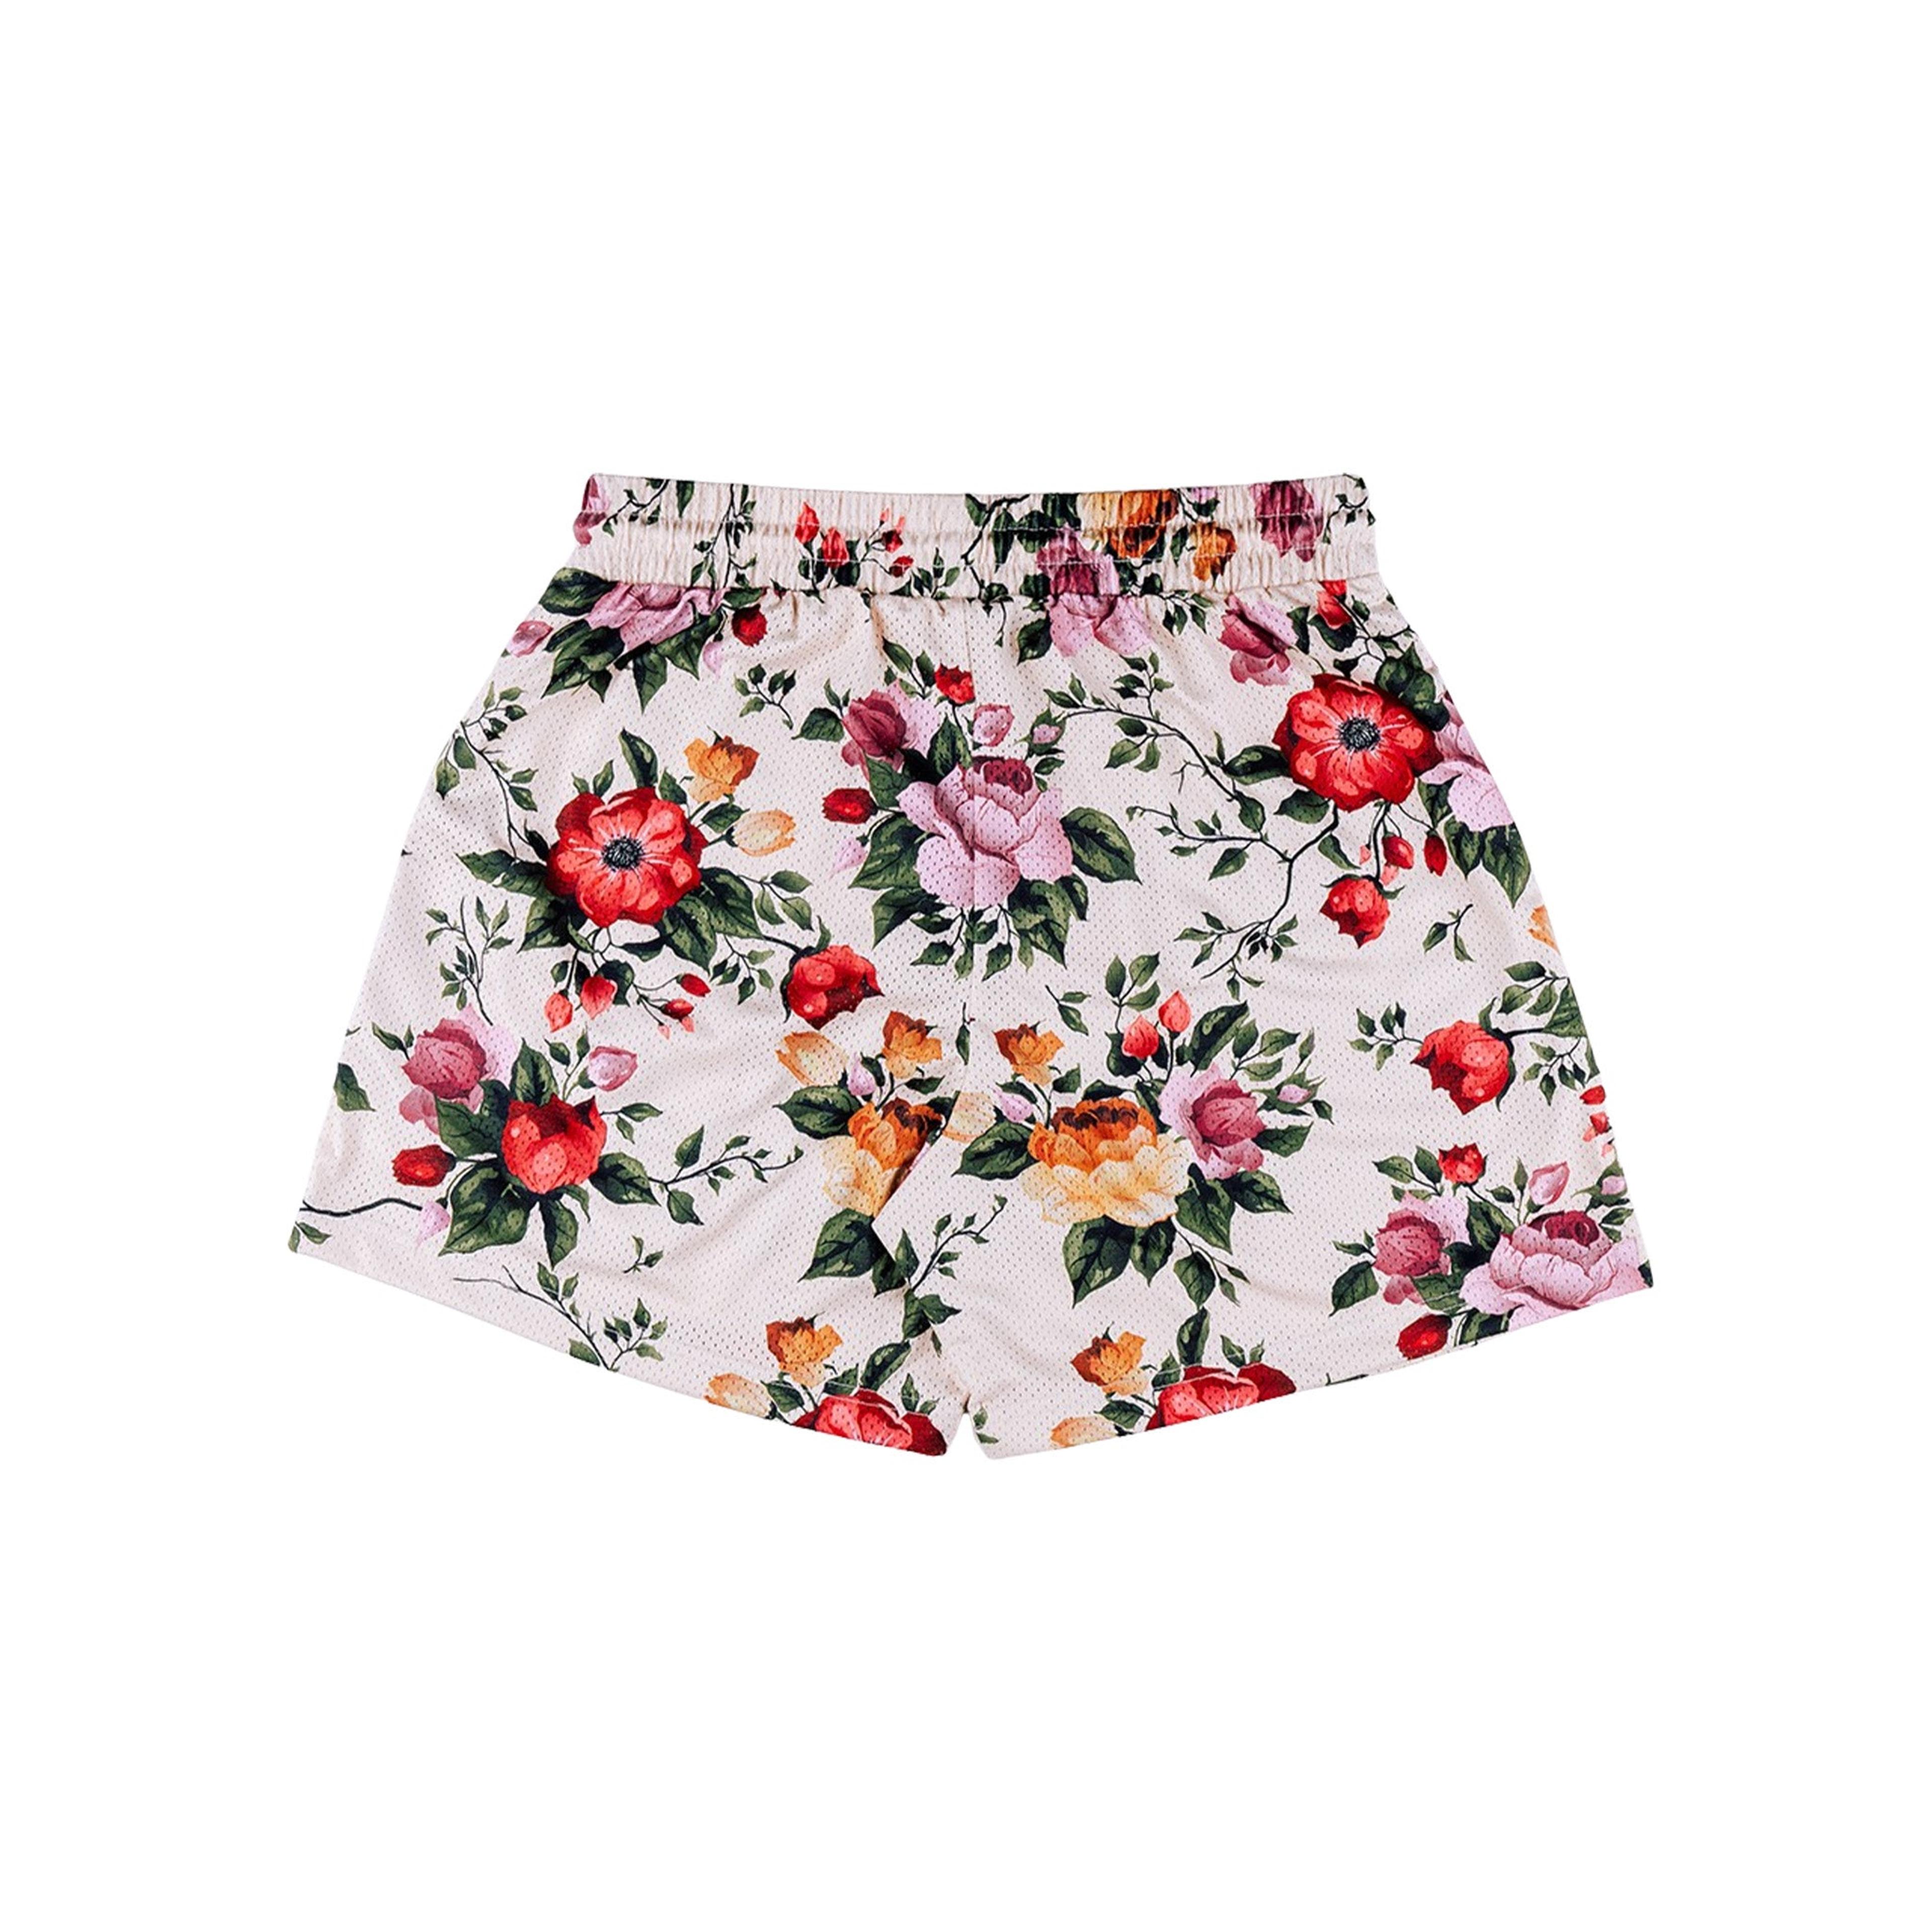 Alternate View 4 of Common Hype Cream Floral Short